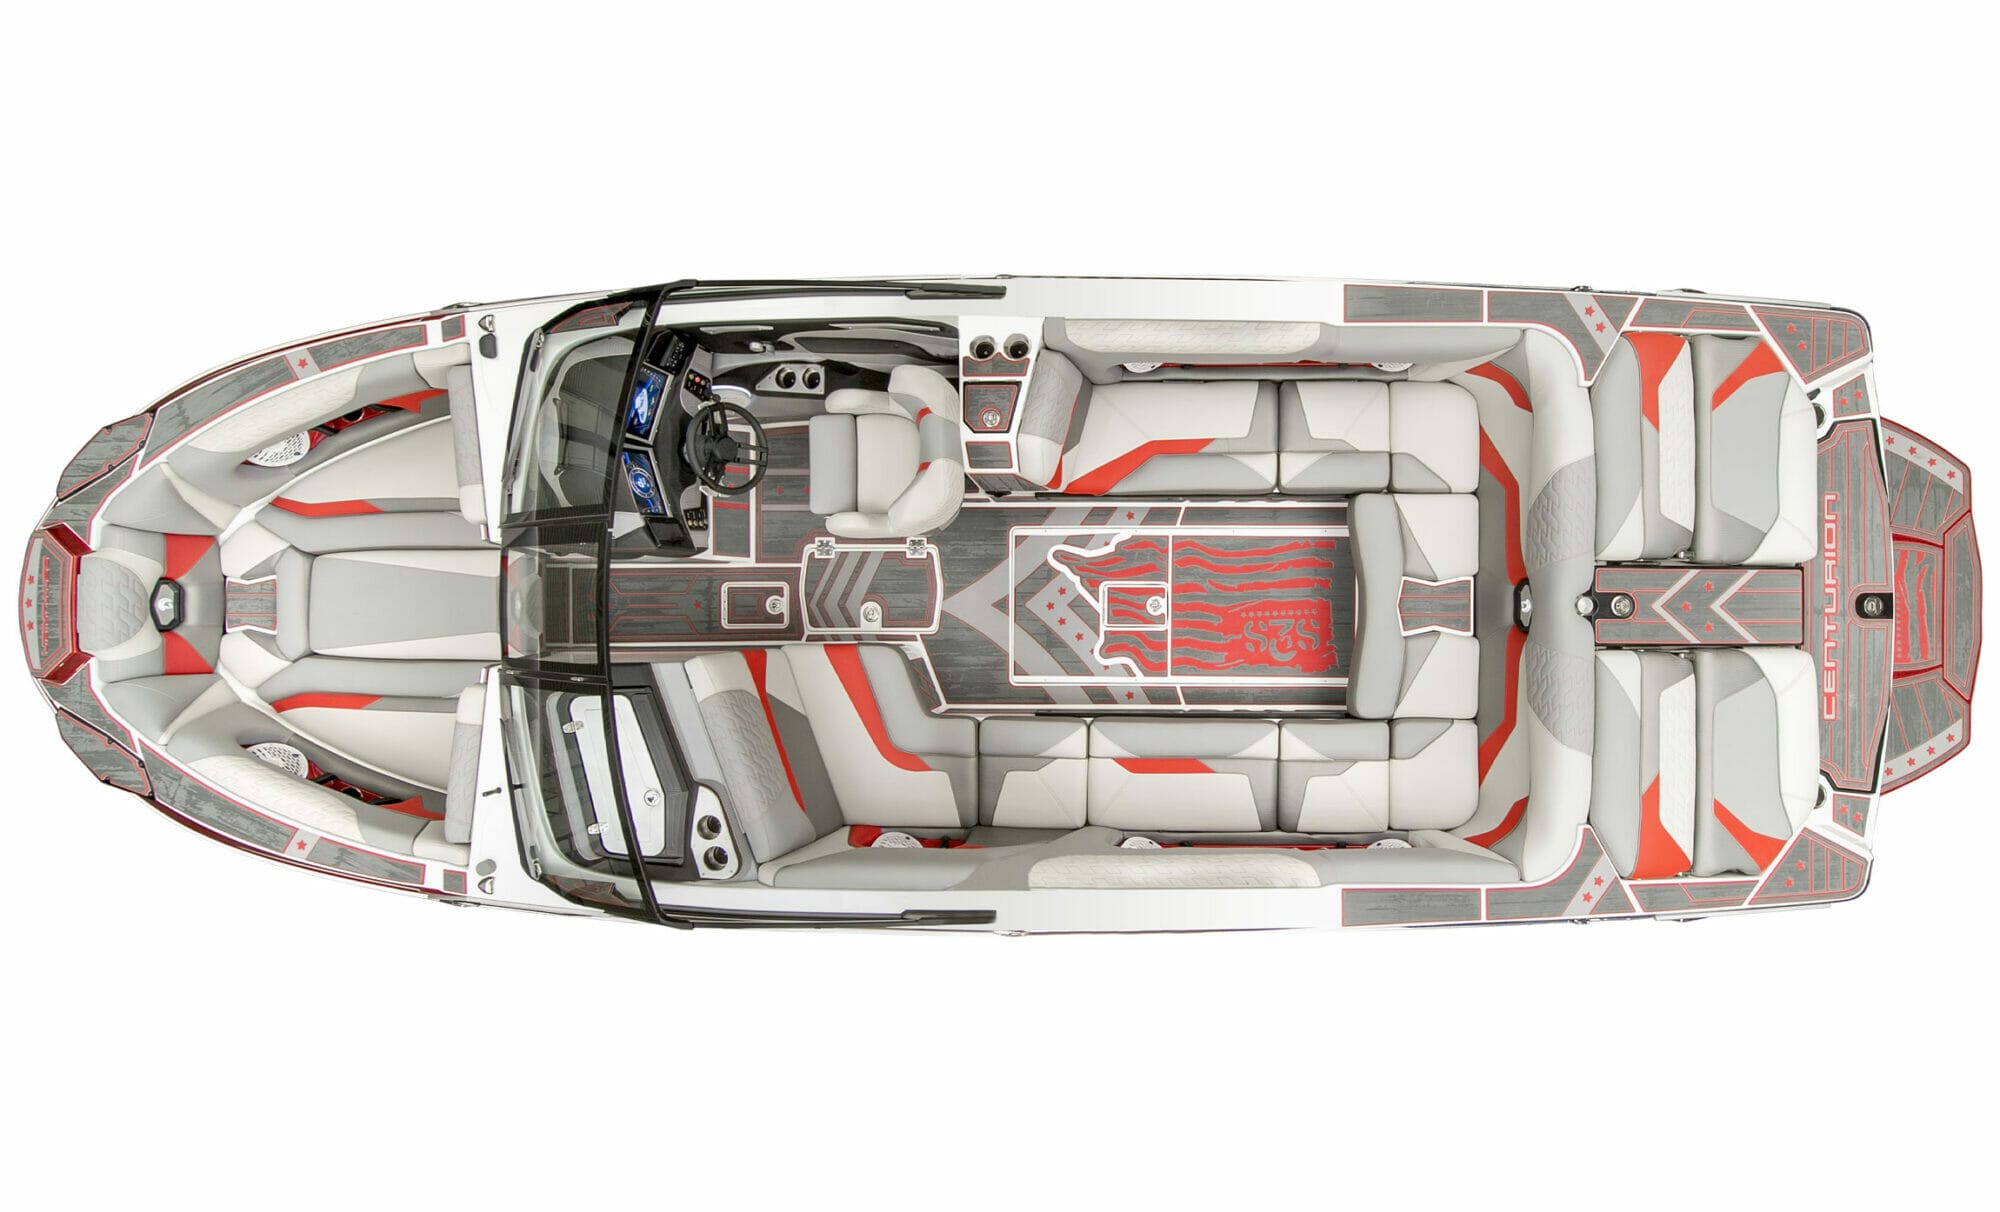 The top view of a wakesurf boat with a red and white interior.